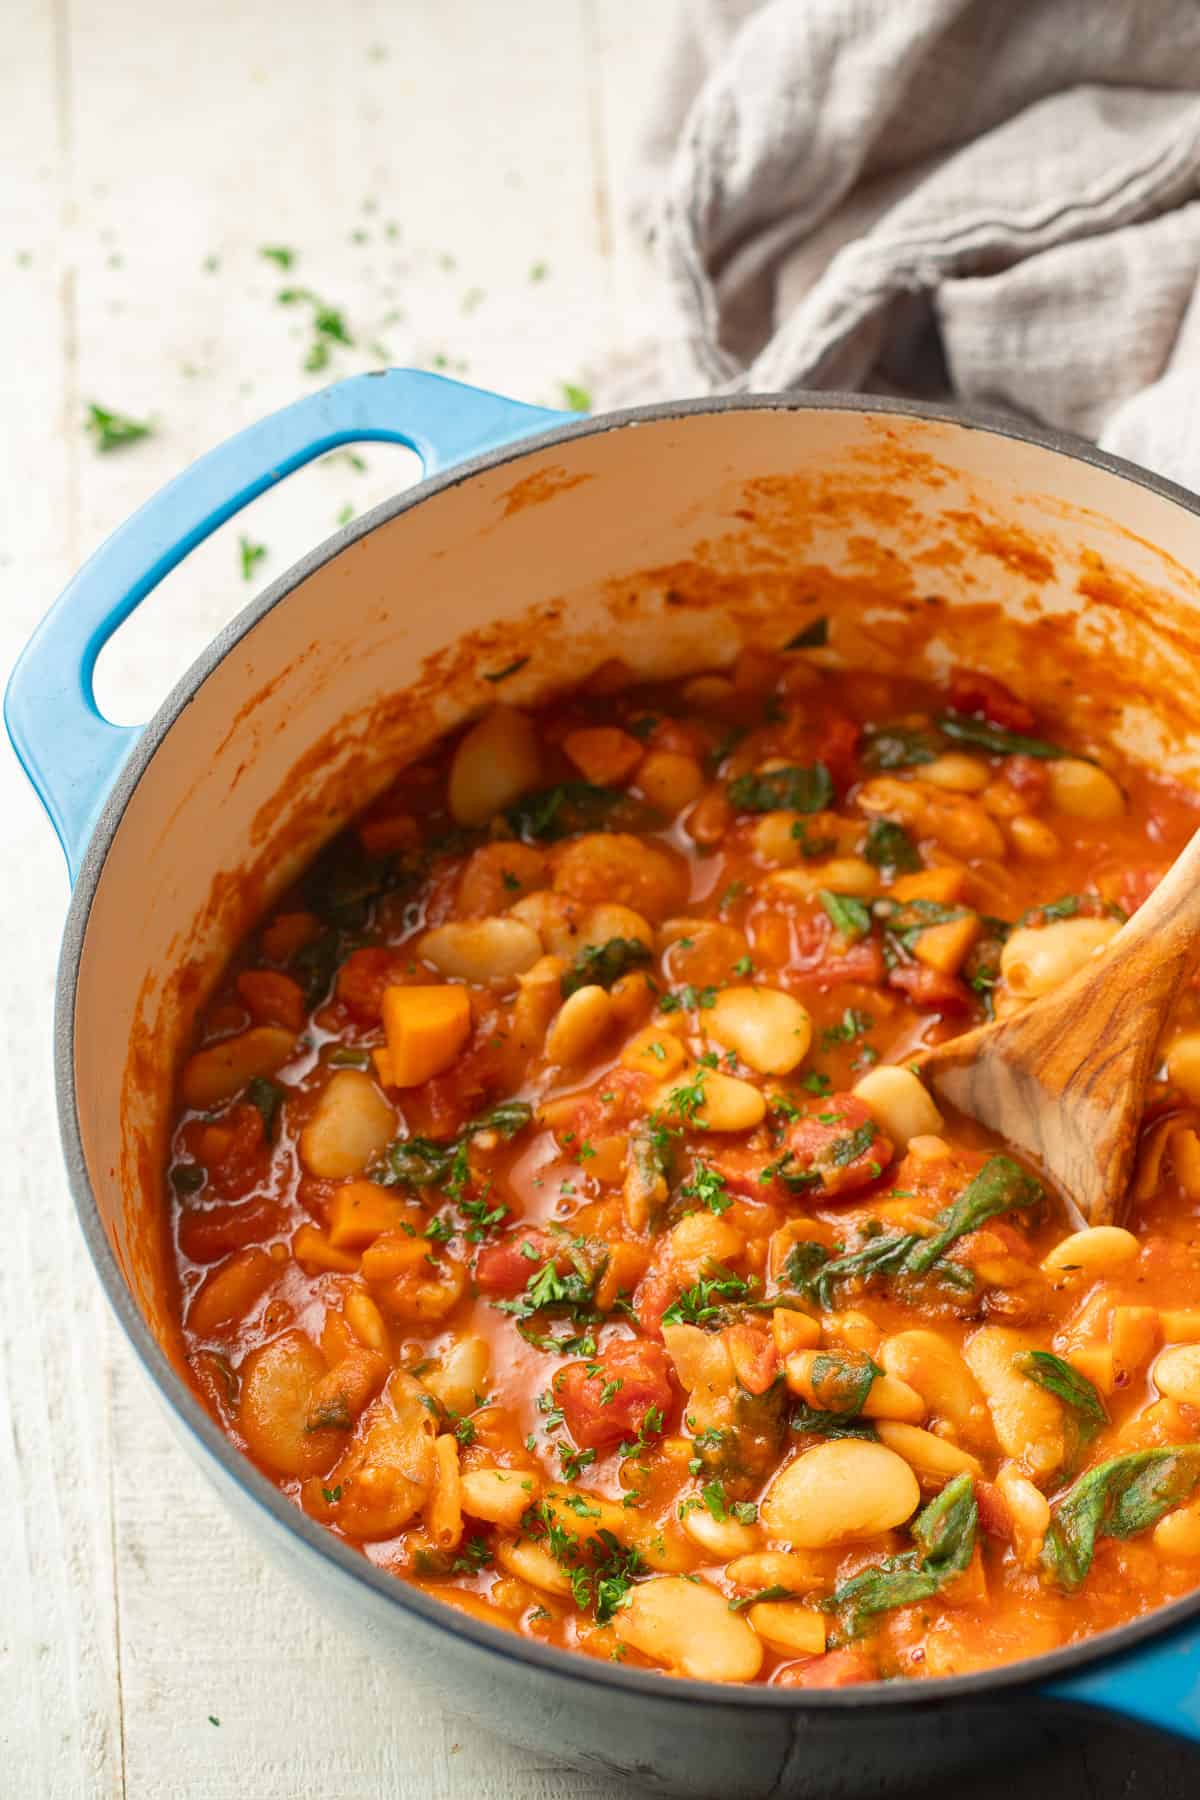 Pot of Butter Bean Stew with a wooden spoon.